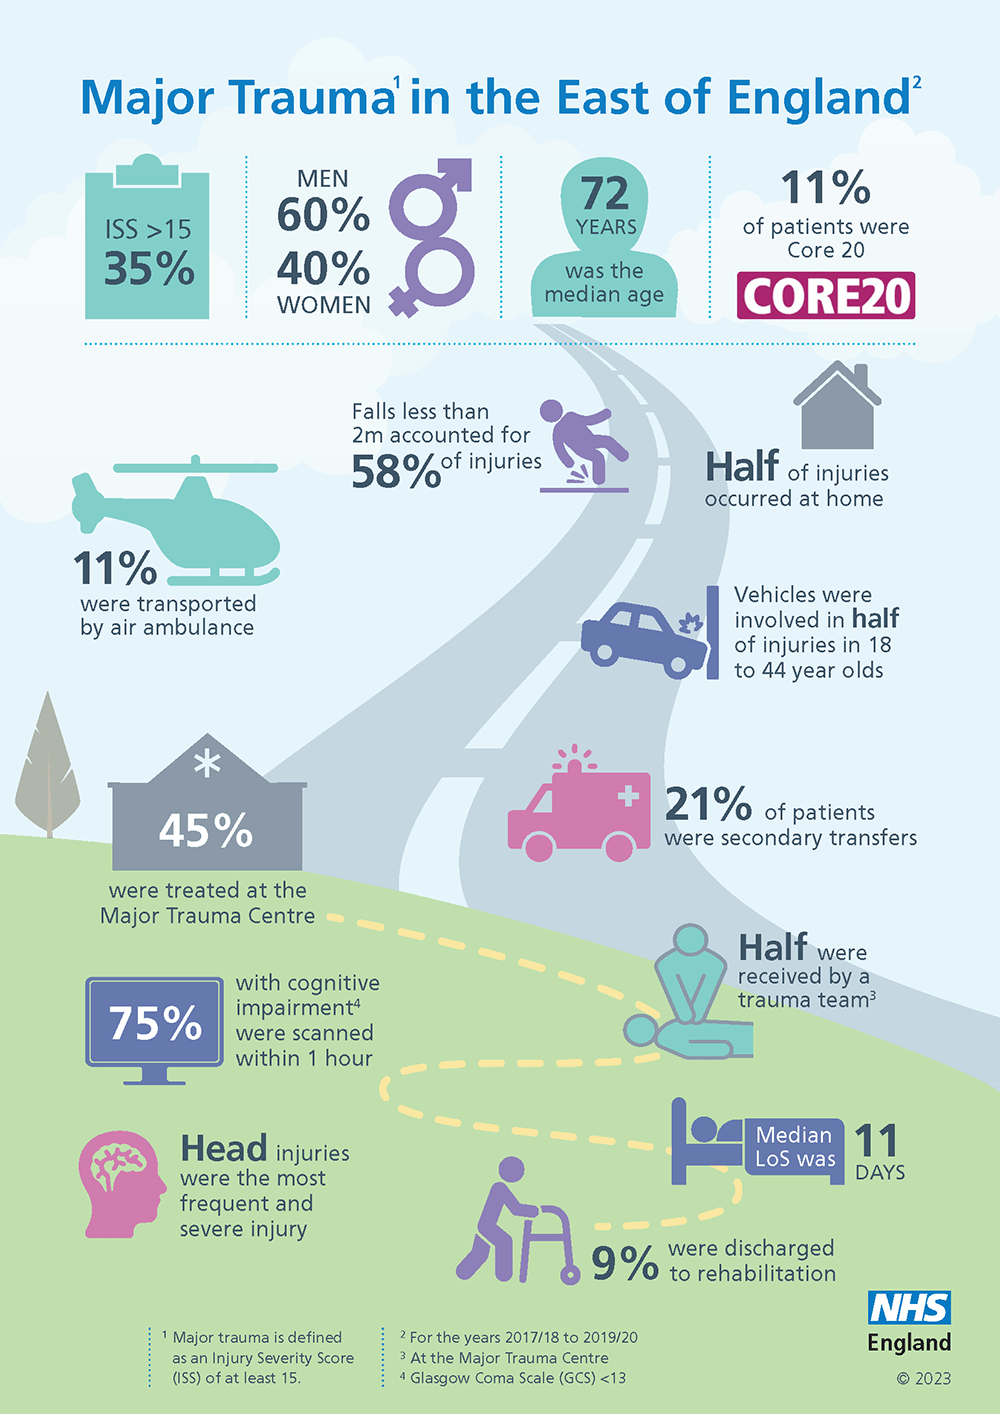 Graphic of statistics on major trauma in the East of England, for example half of injuries occurred at home, and 45% were treated at the Major Trauma Centre.